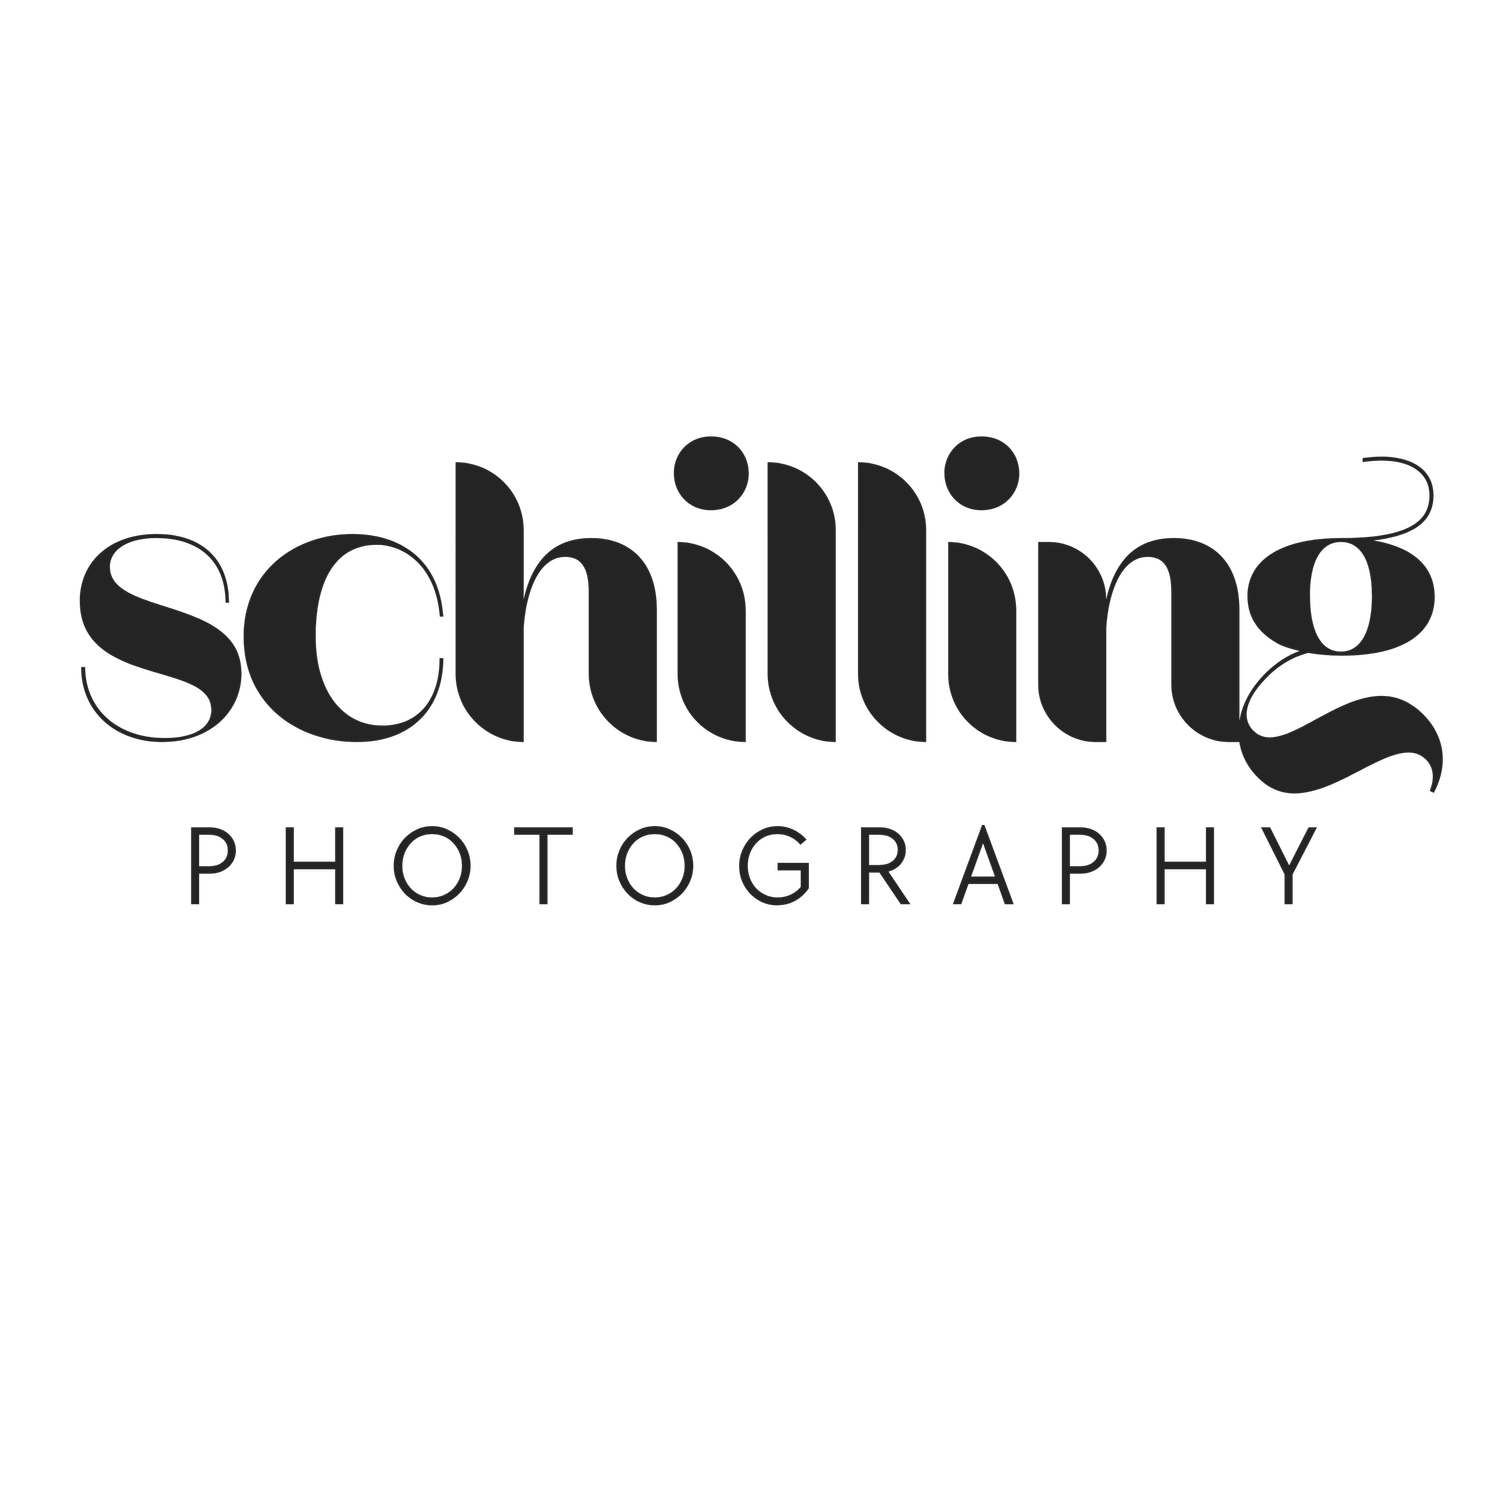 Schilling Photography